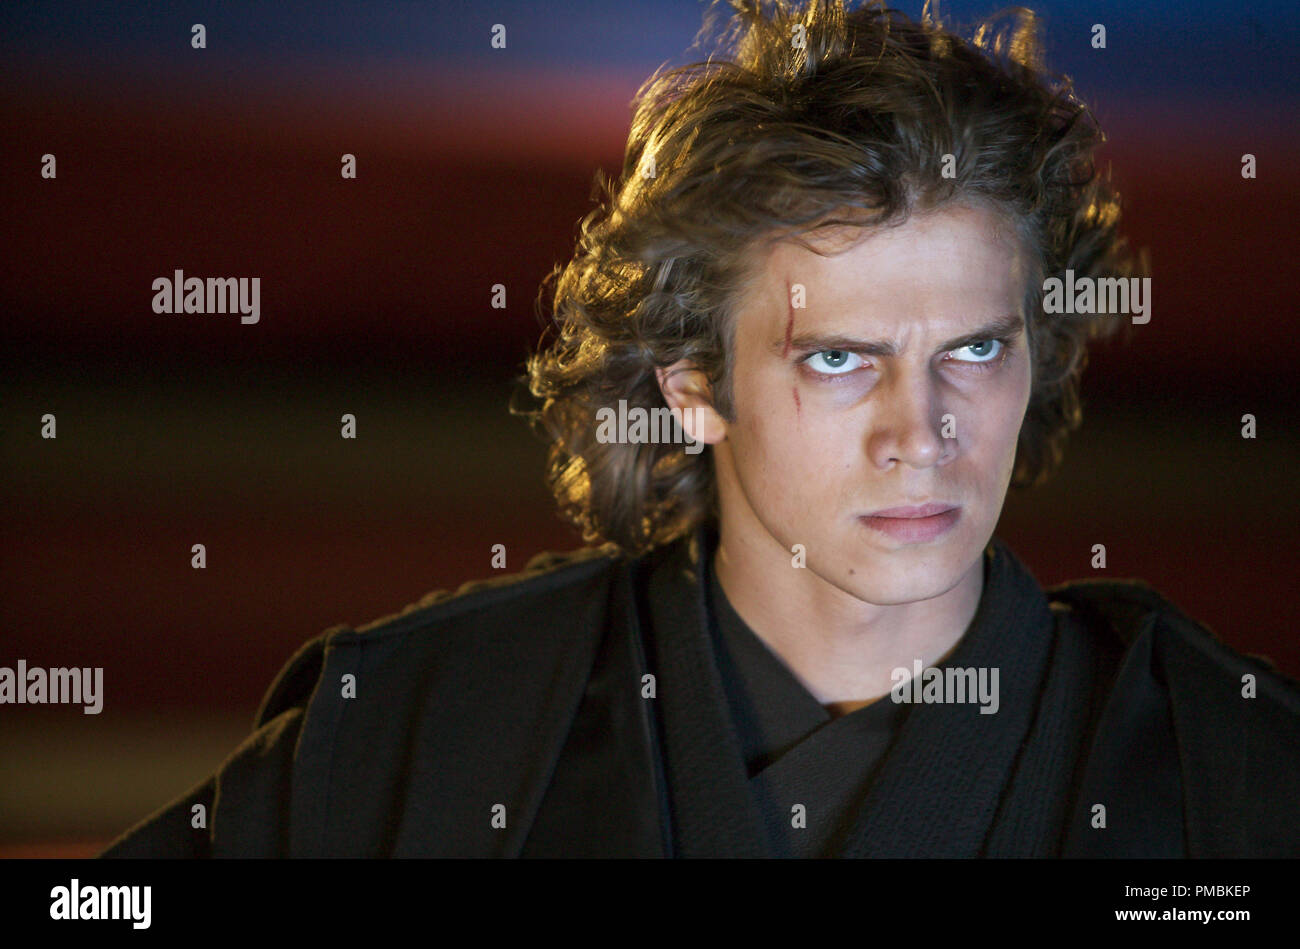 Hayden Christensen plays troubled young Jedi Anakin Skywalker in Star Wars: Episode III Revenge of the Sith. TM & © 2005 Lucasfilm Ltd. All Rights Reserved. Stock Photo